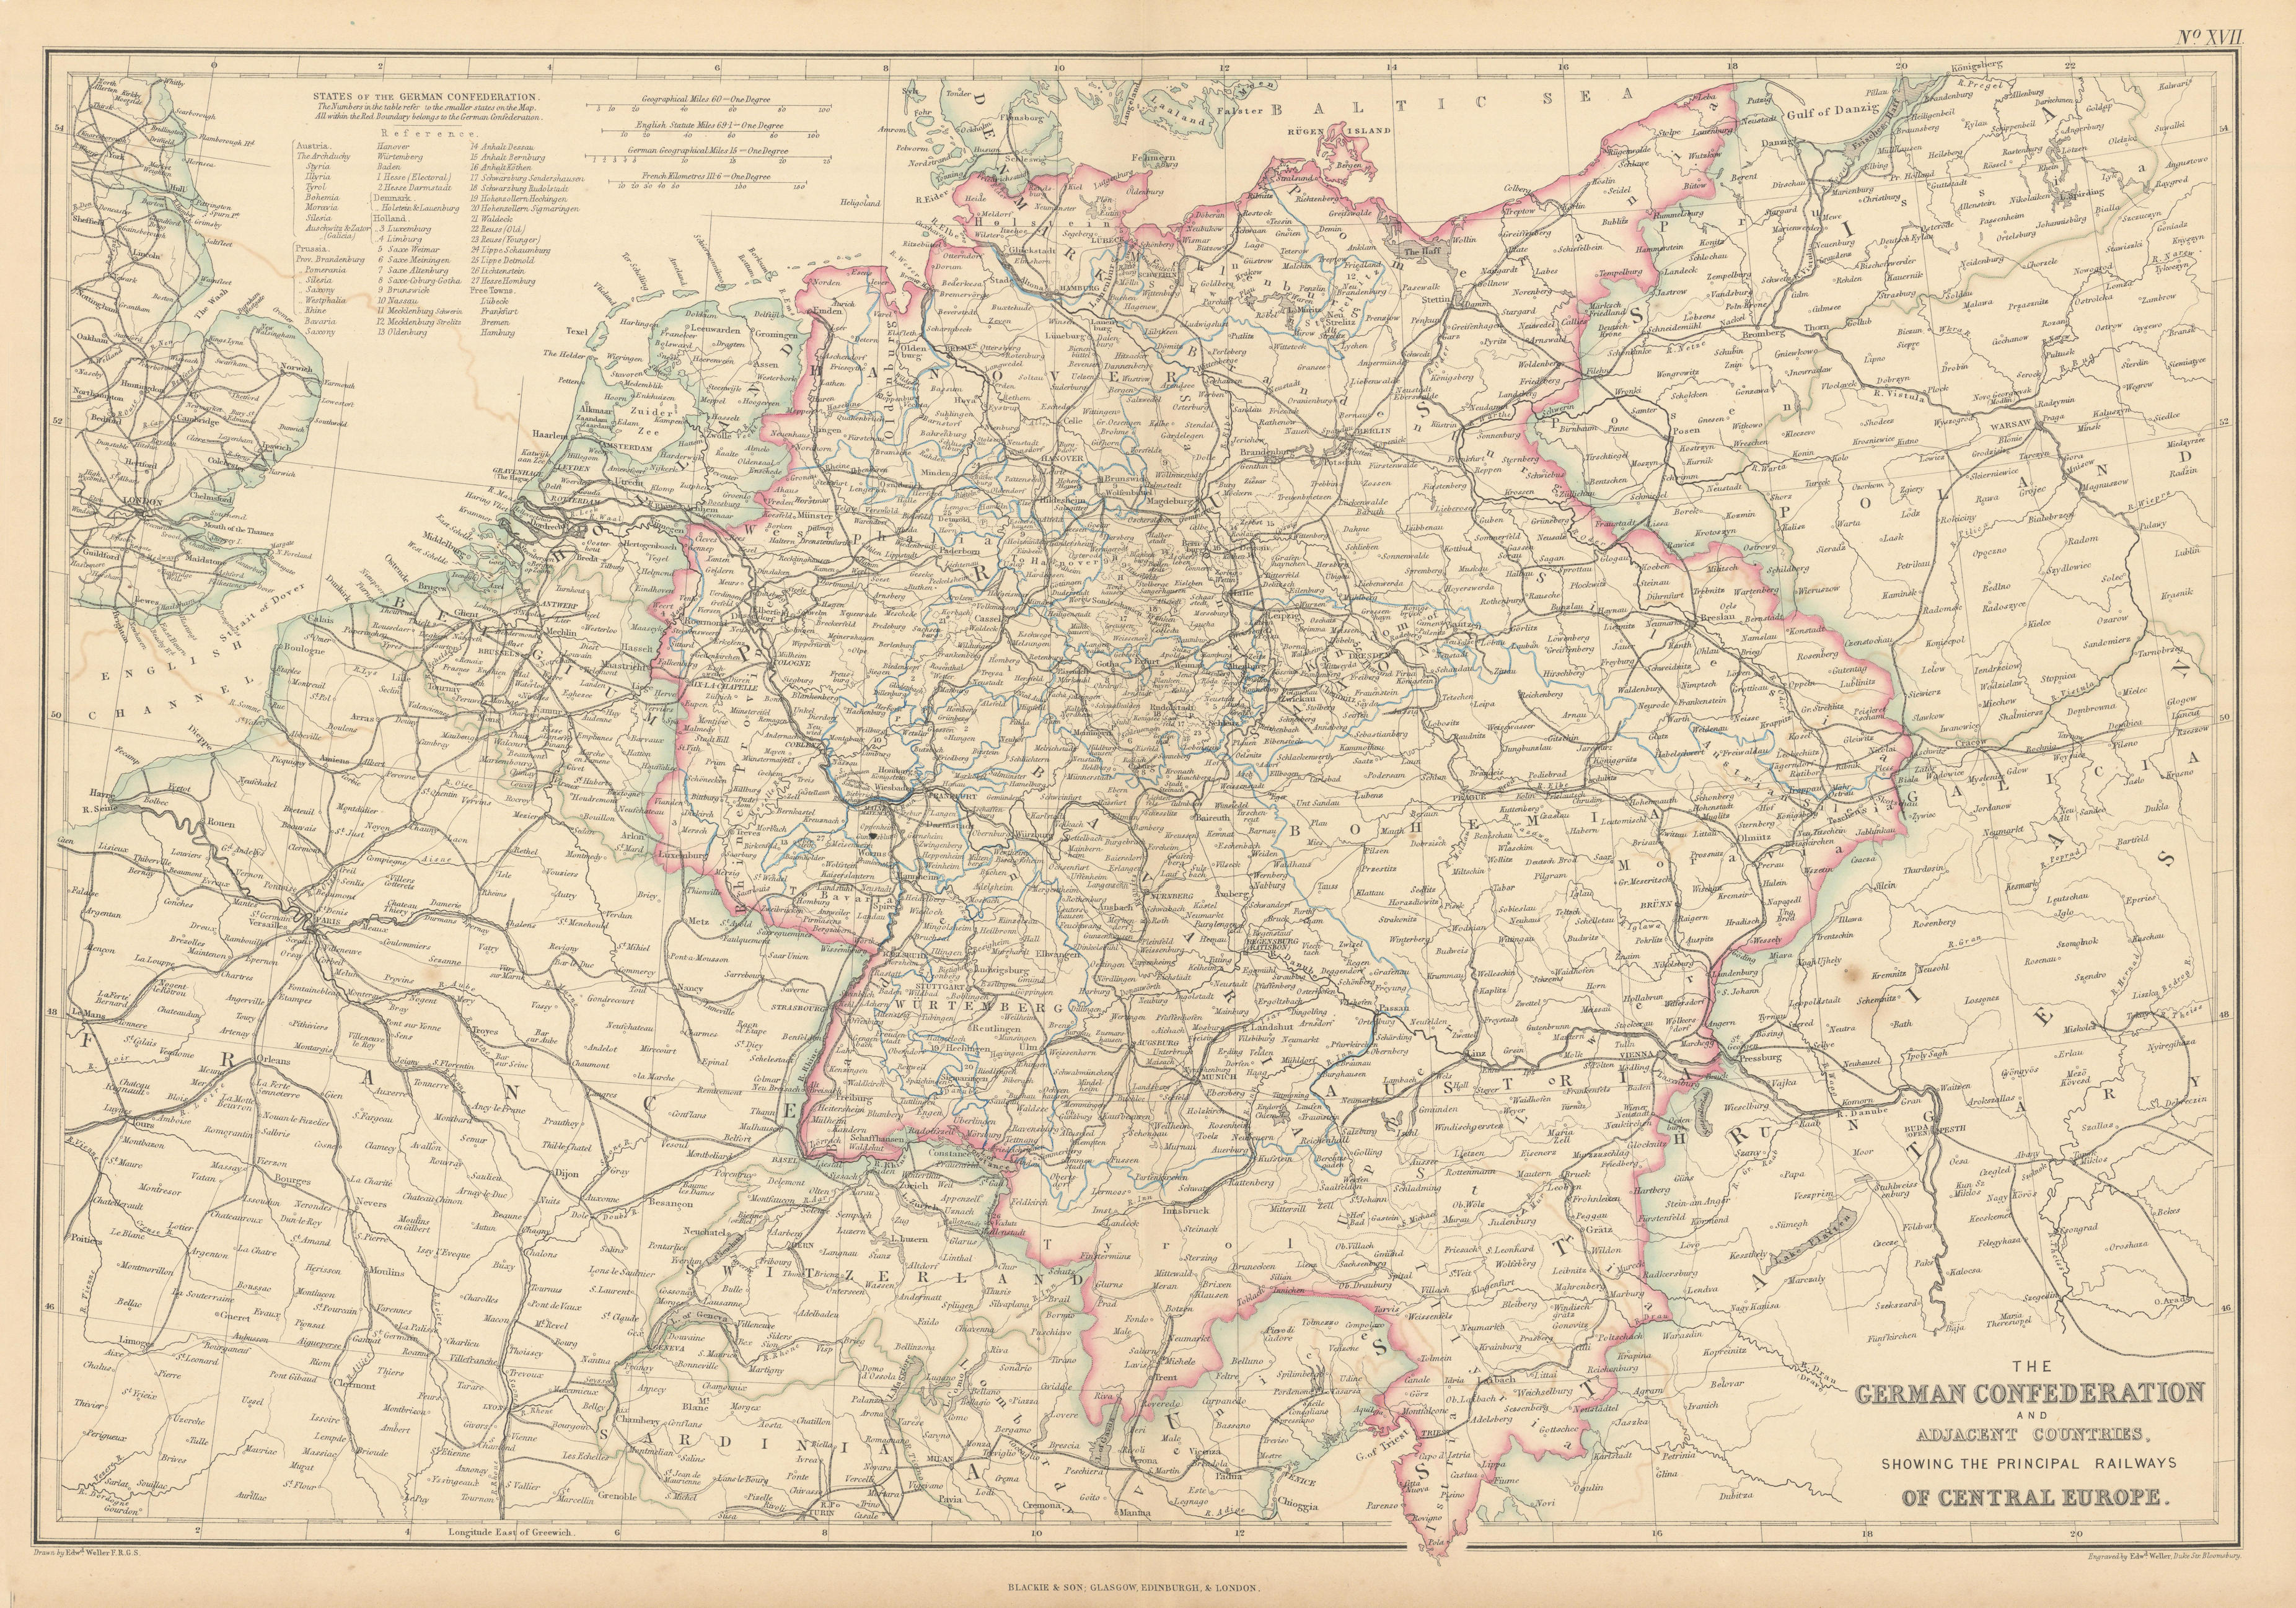 Associate Product German Confederation & Central Europe railways. WELLER 1859 old antique map